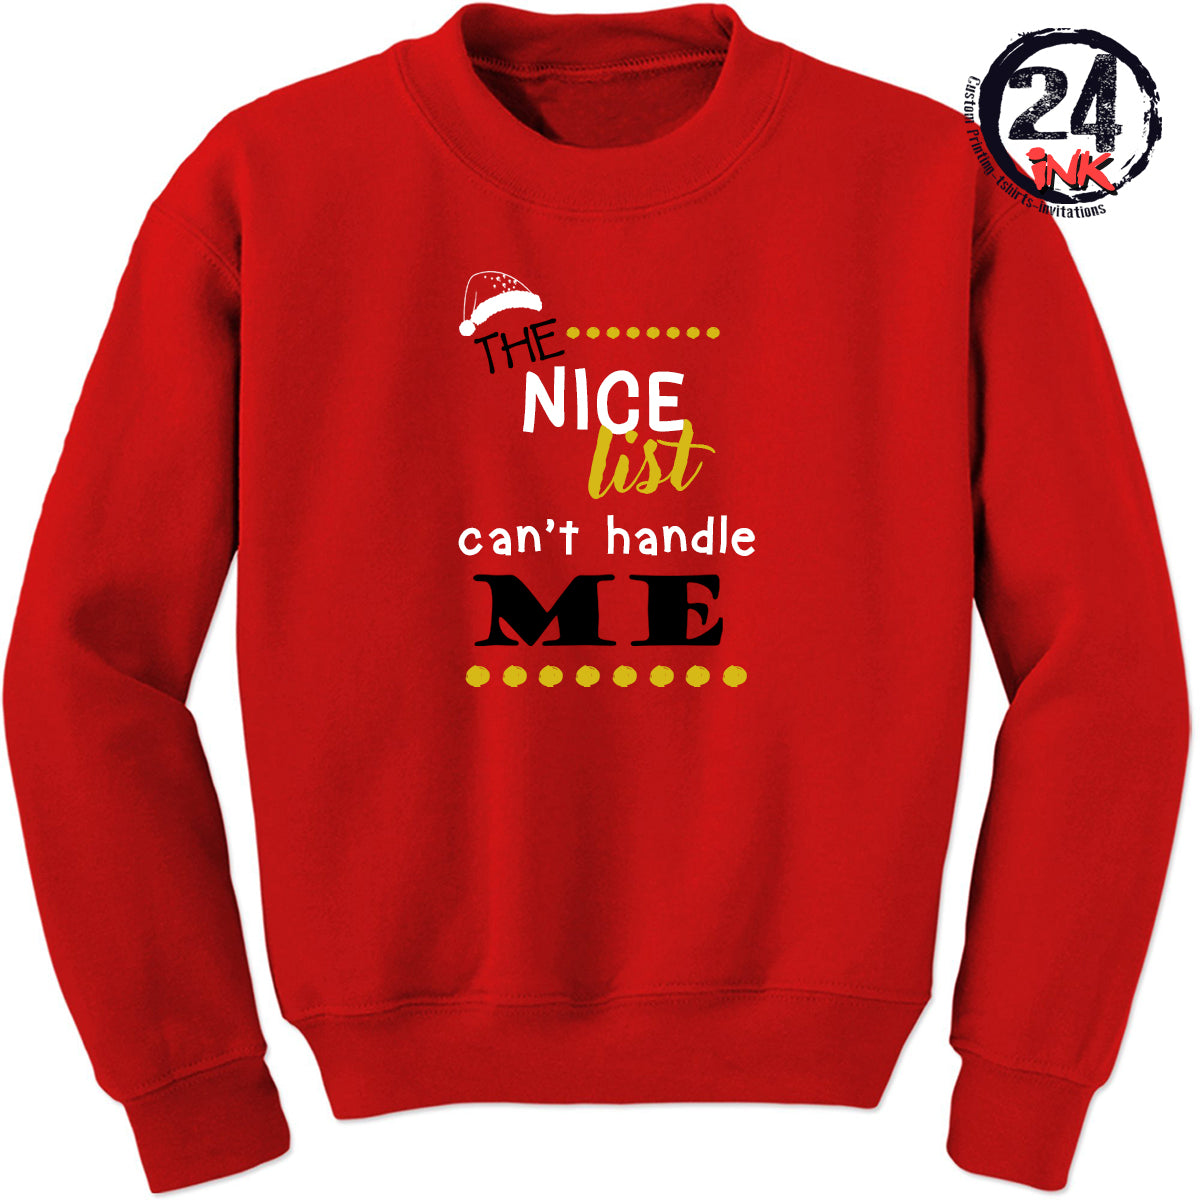 The nice list can't handle me non hooded sweatshirt